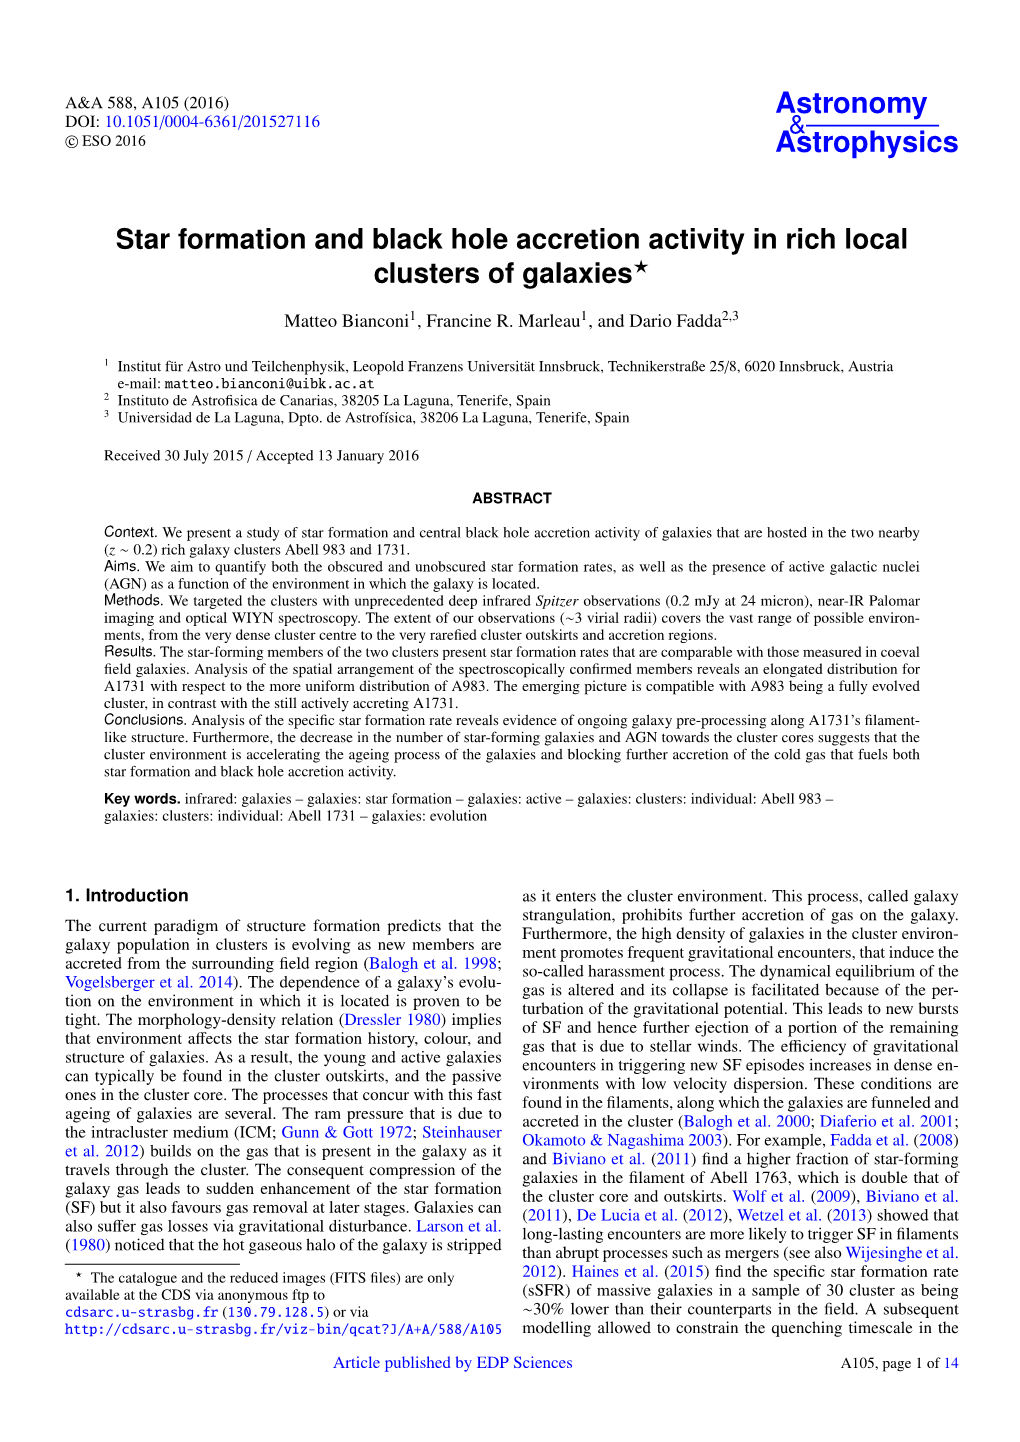 Star Formation and Black Hole Accretion Activity in Rich Local Clusters of Galaxies?